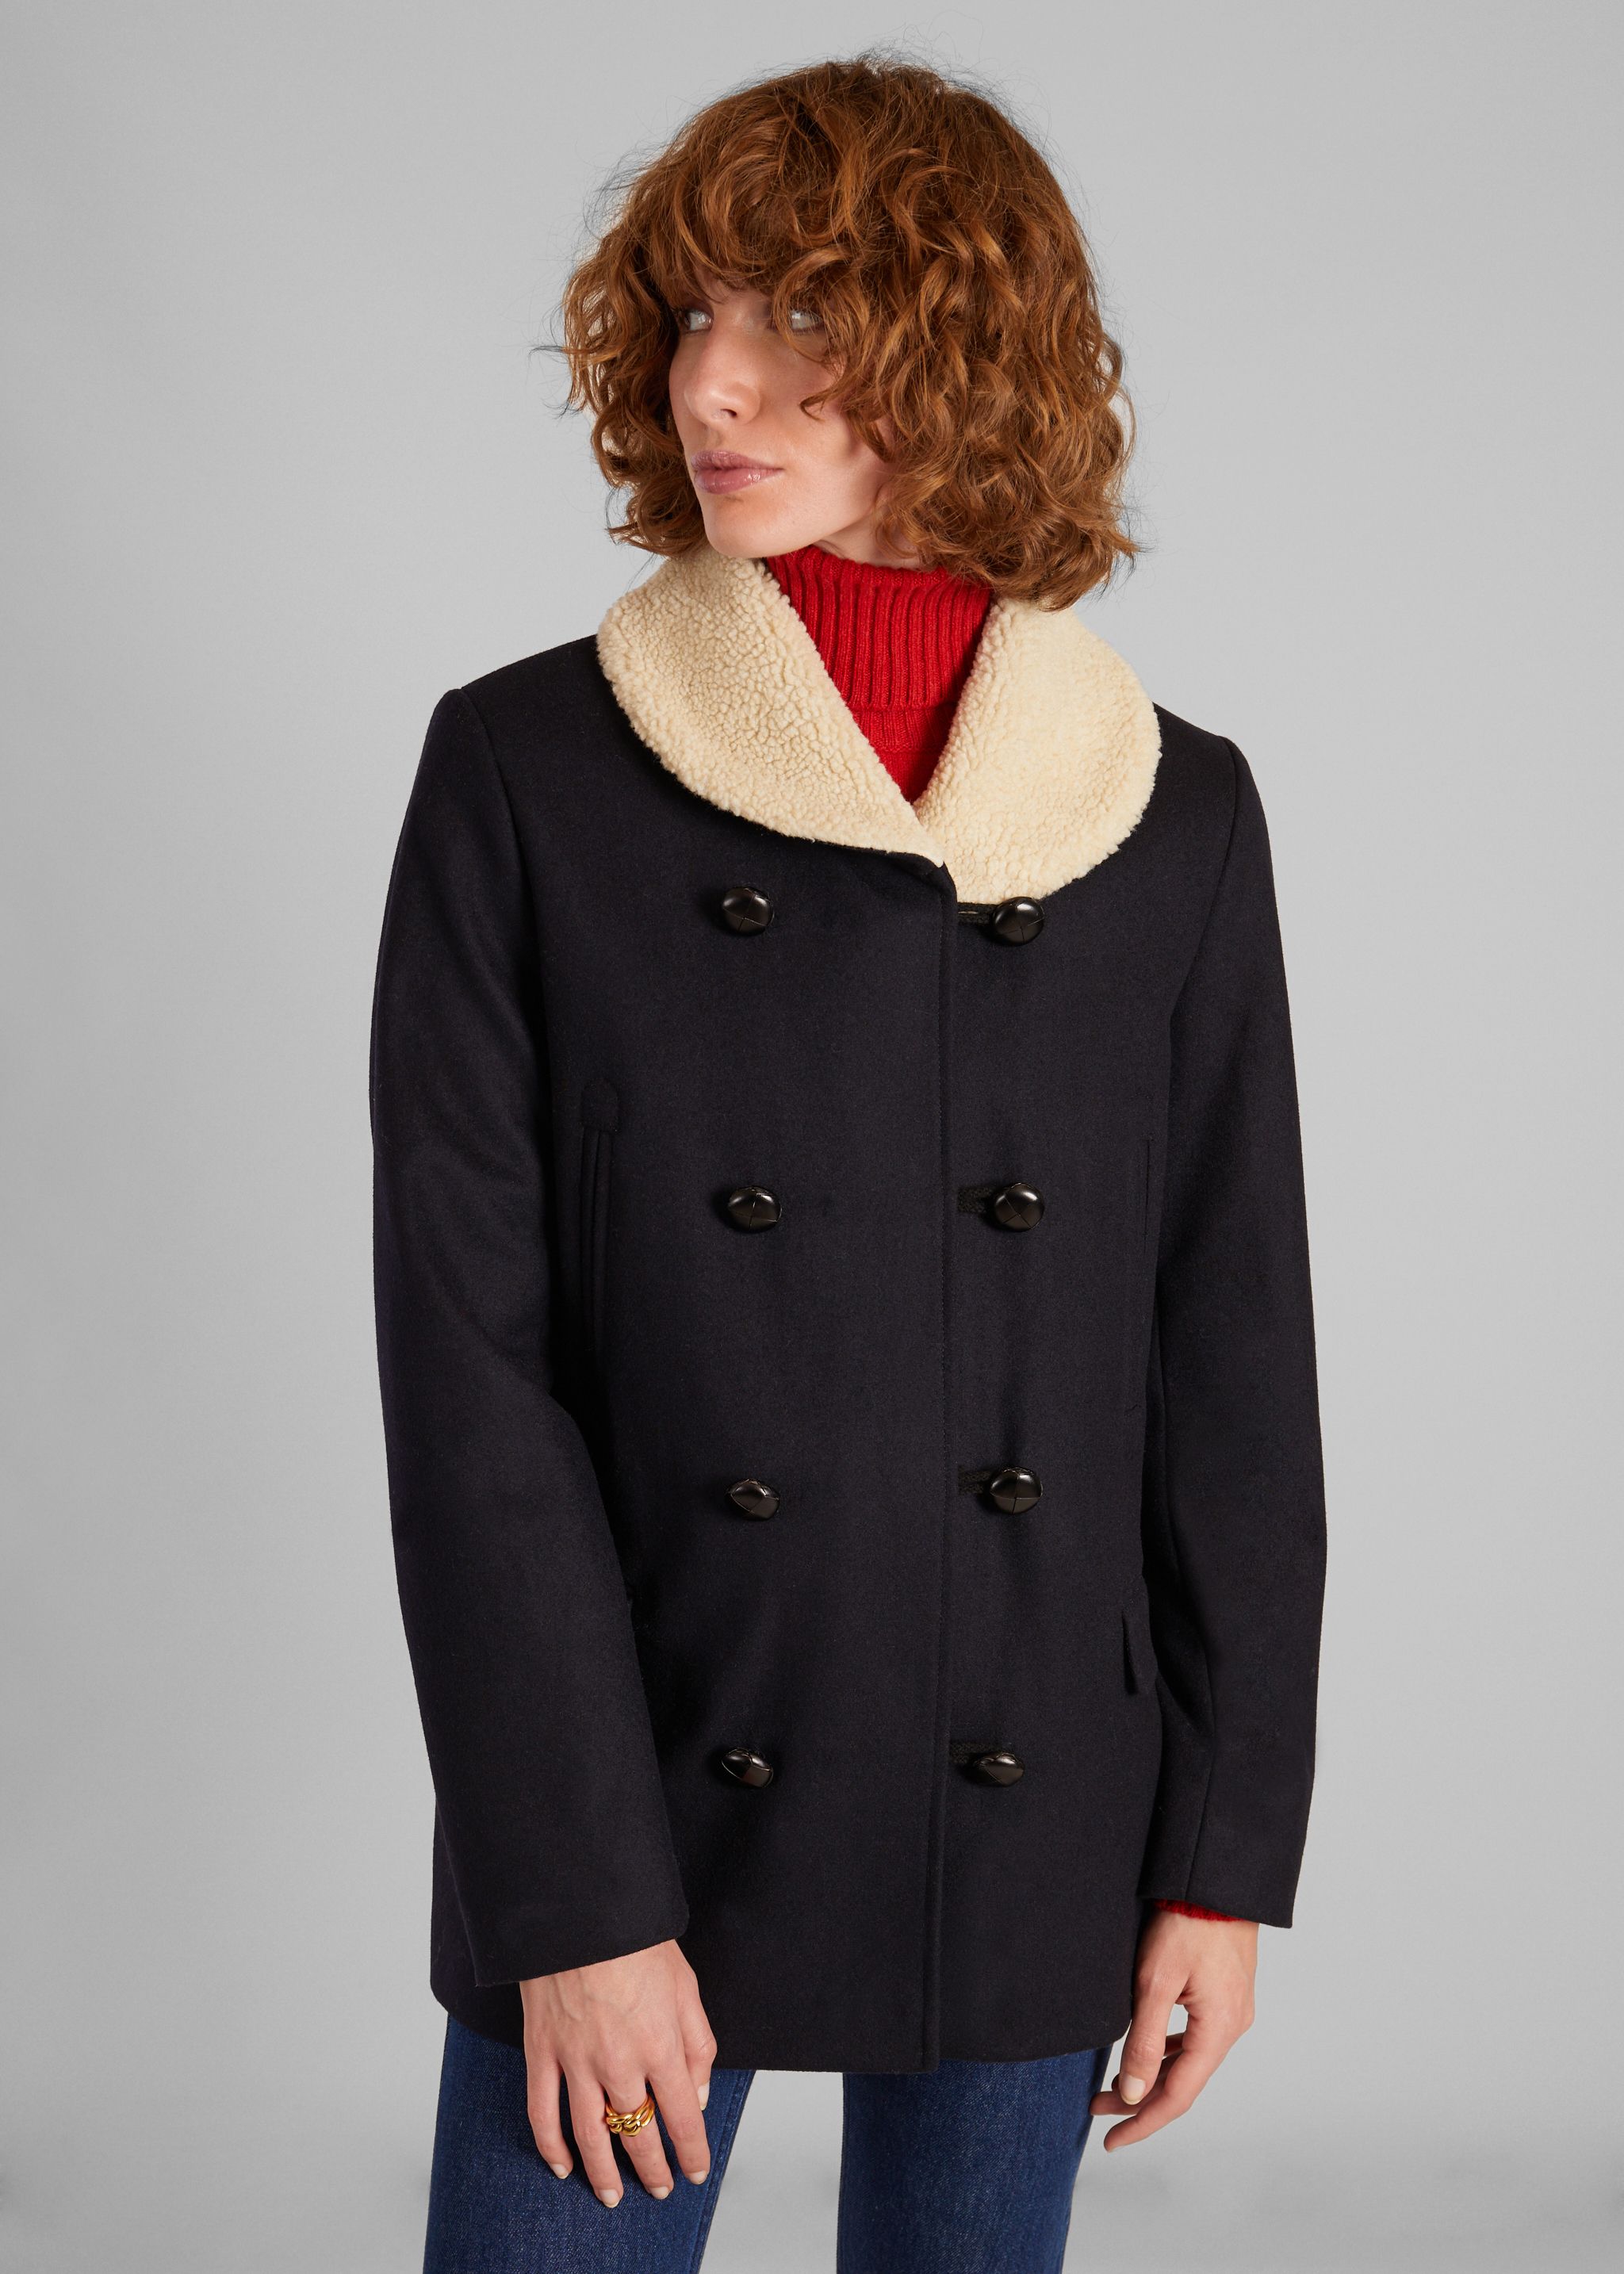 Canadian wool and sheepskin collar made in France - L'Exception Paris